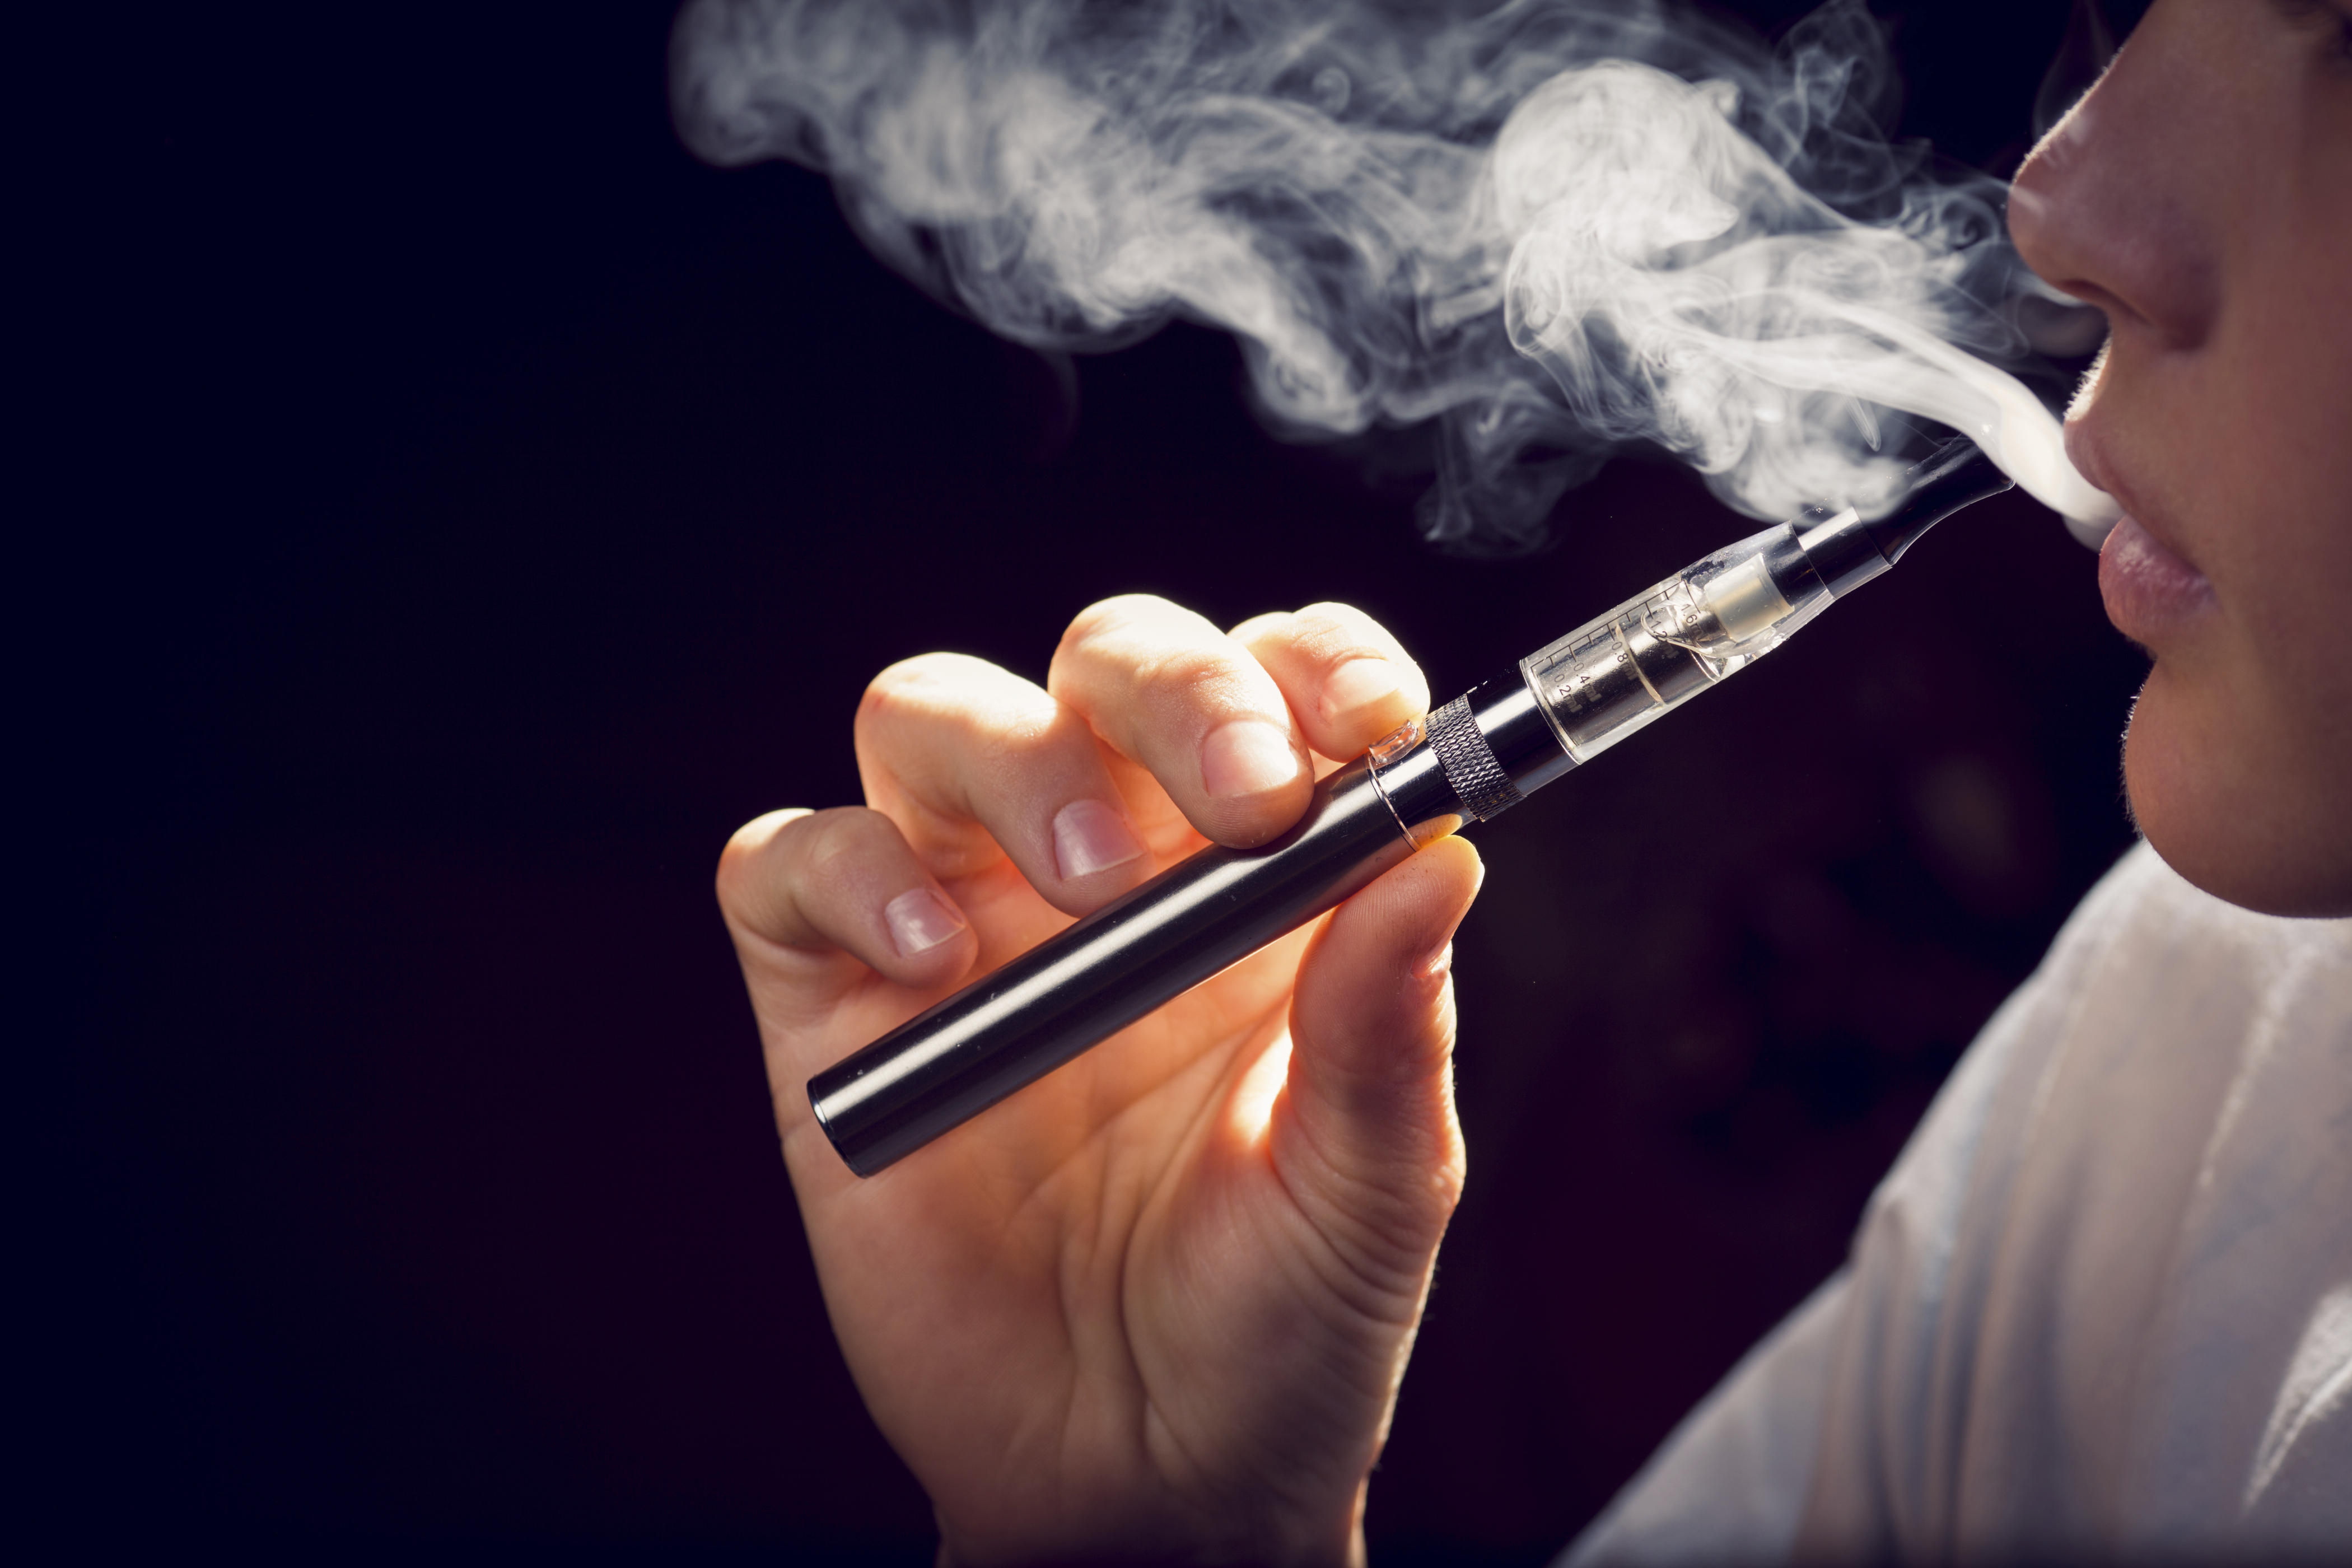 The use of e-cigarette instead of traditional cigarettes is known as vaping